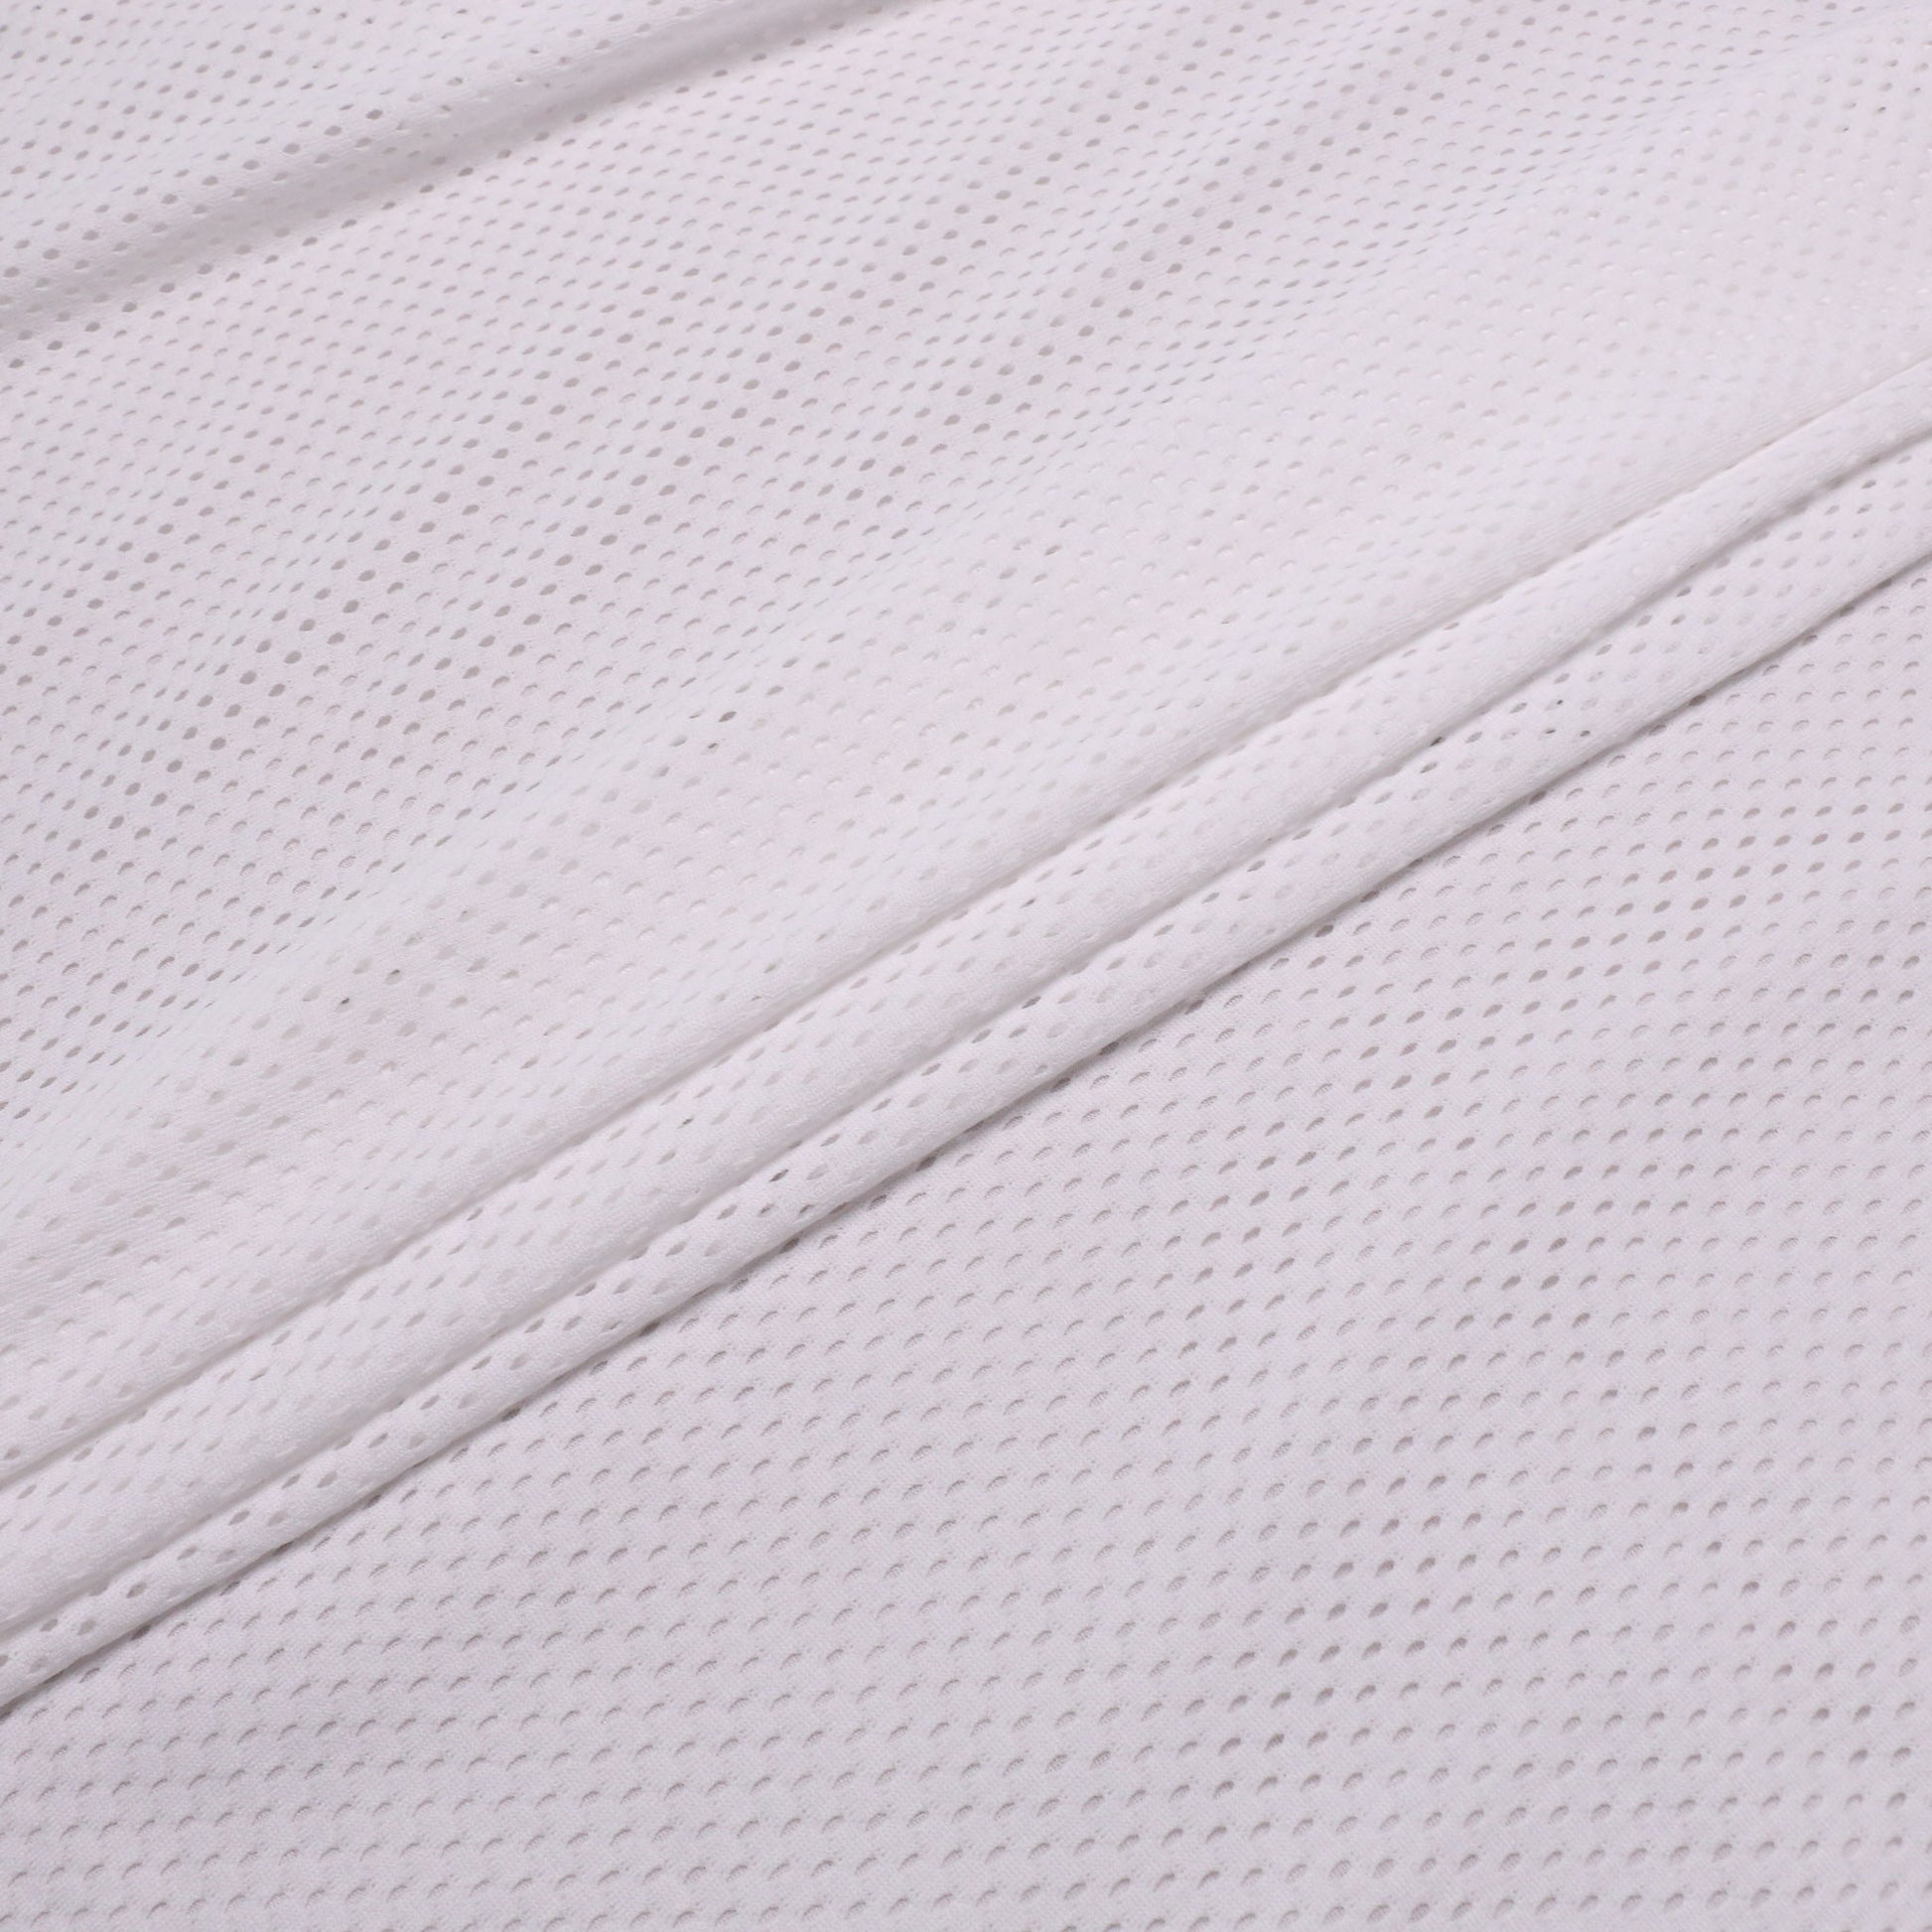 airtex mesh sportswear fabric for sale in white colour for dressmaking crafts